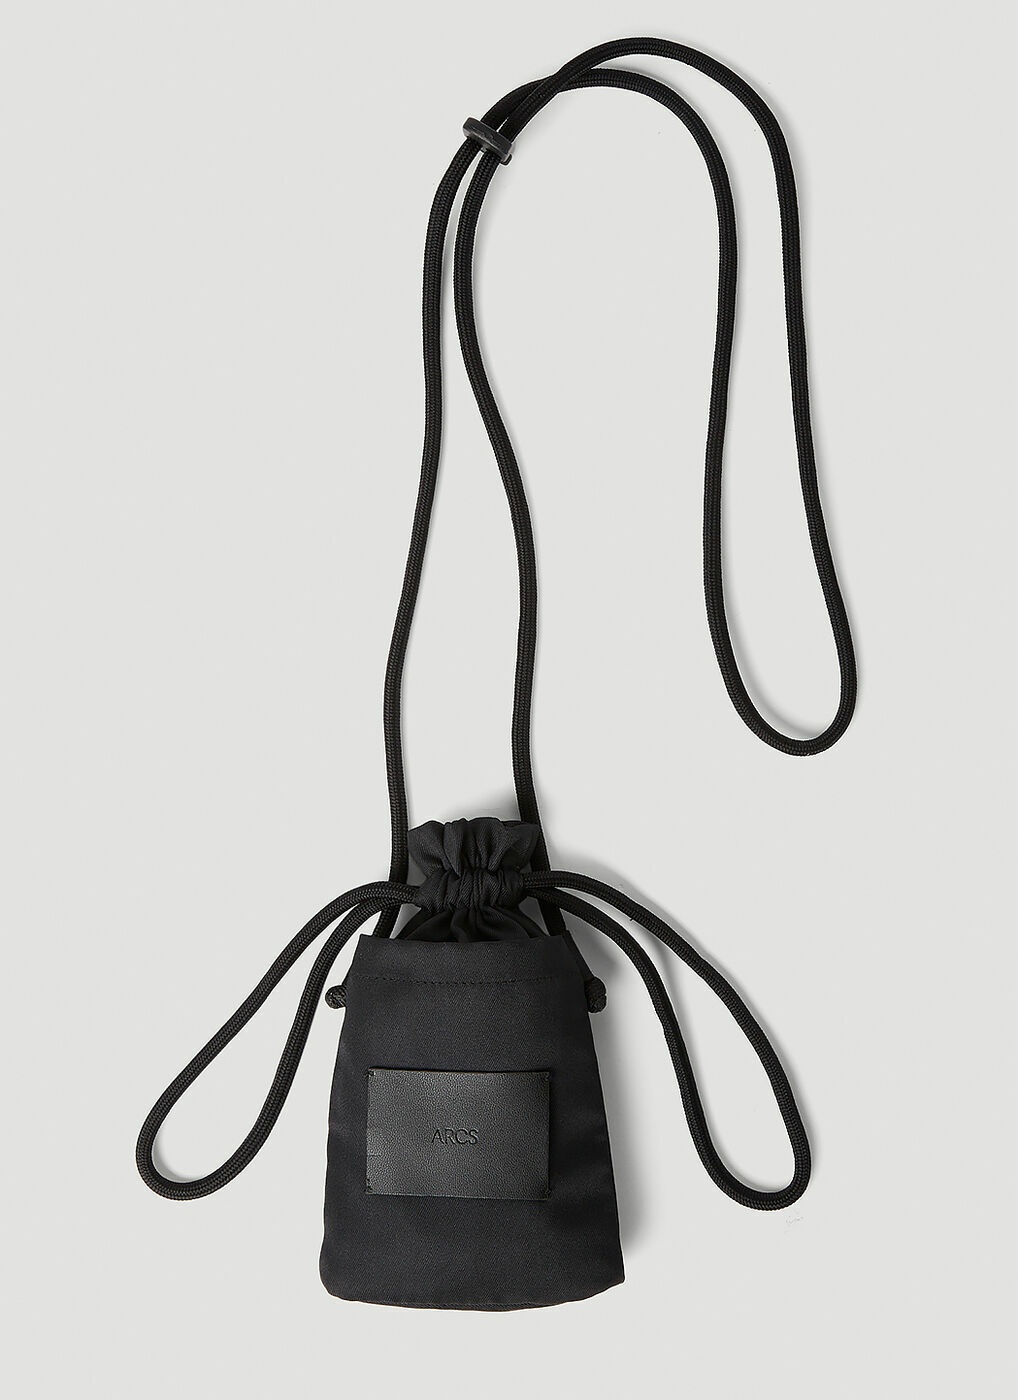 Arcs - Minute Neck Pouch in Black